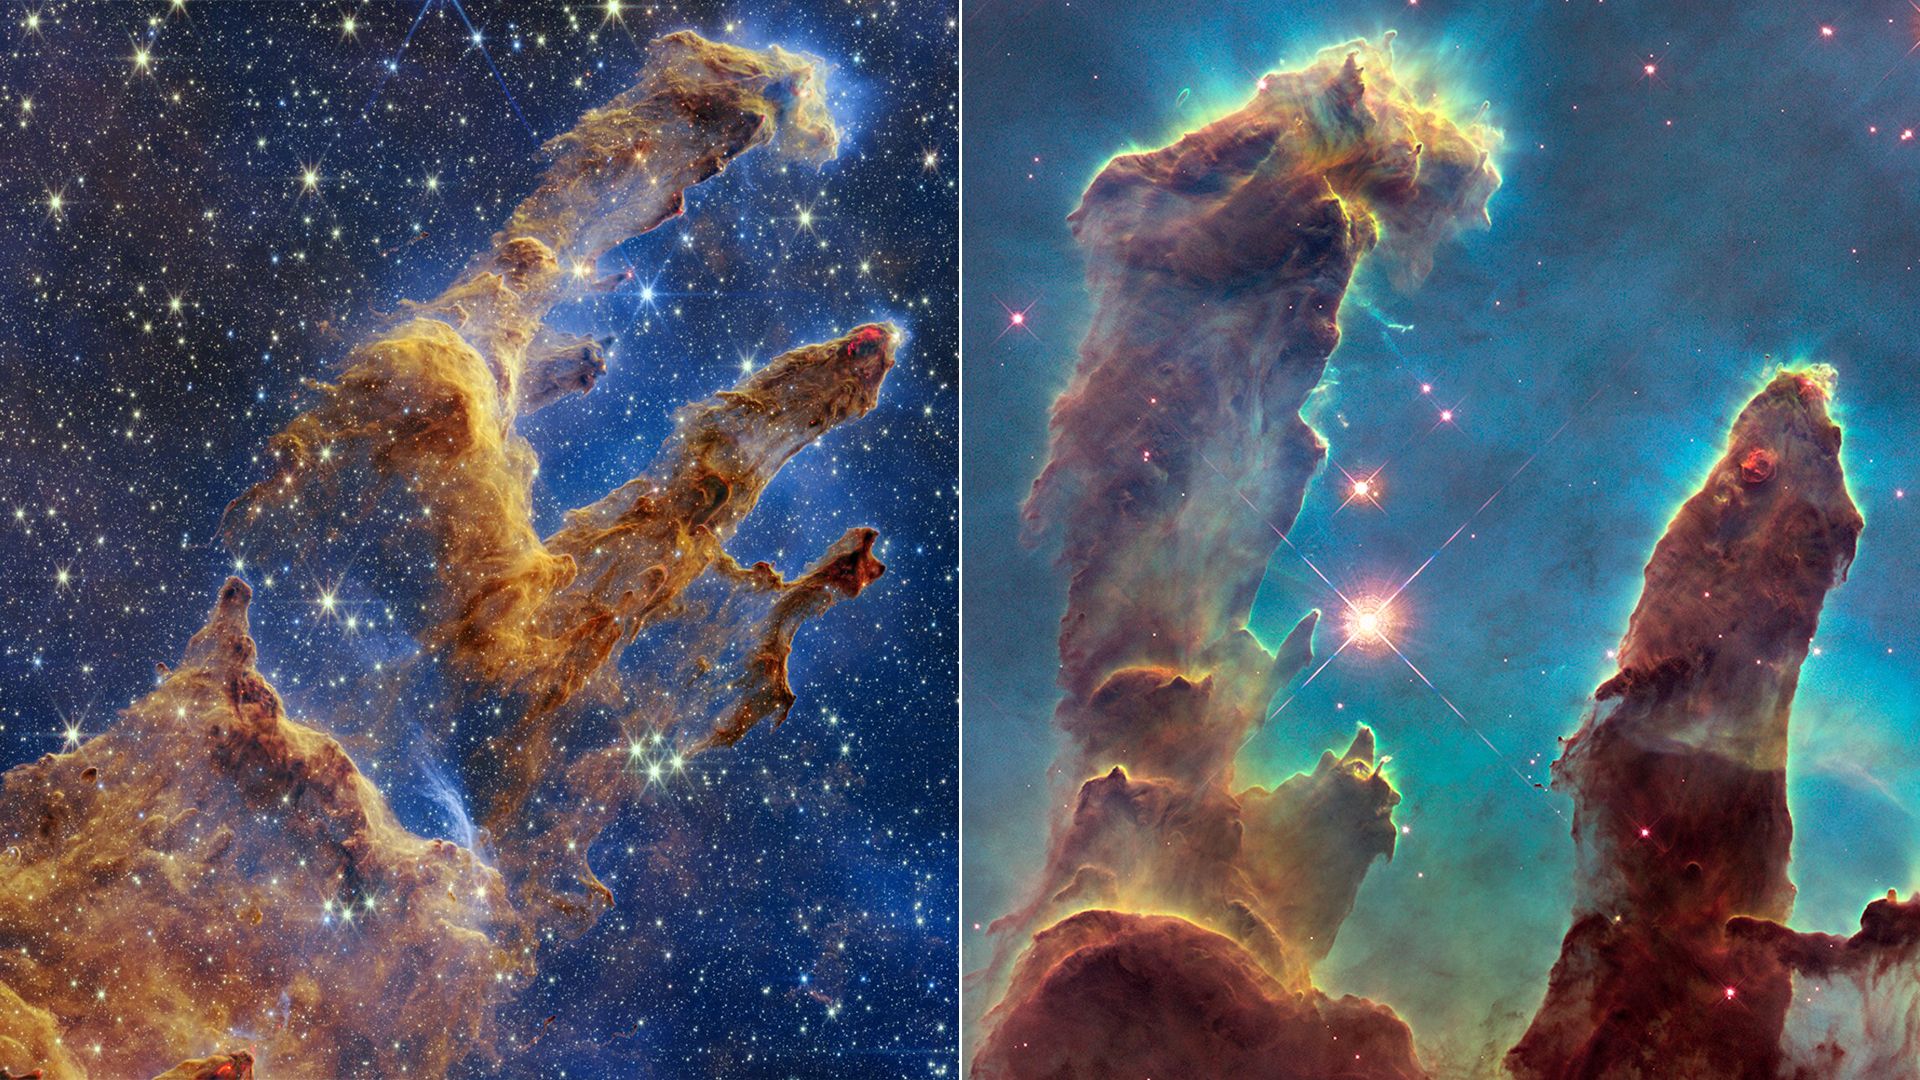 A side-by-side image of the JWST image of the Pillars of Creation with the Hubble image